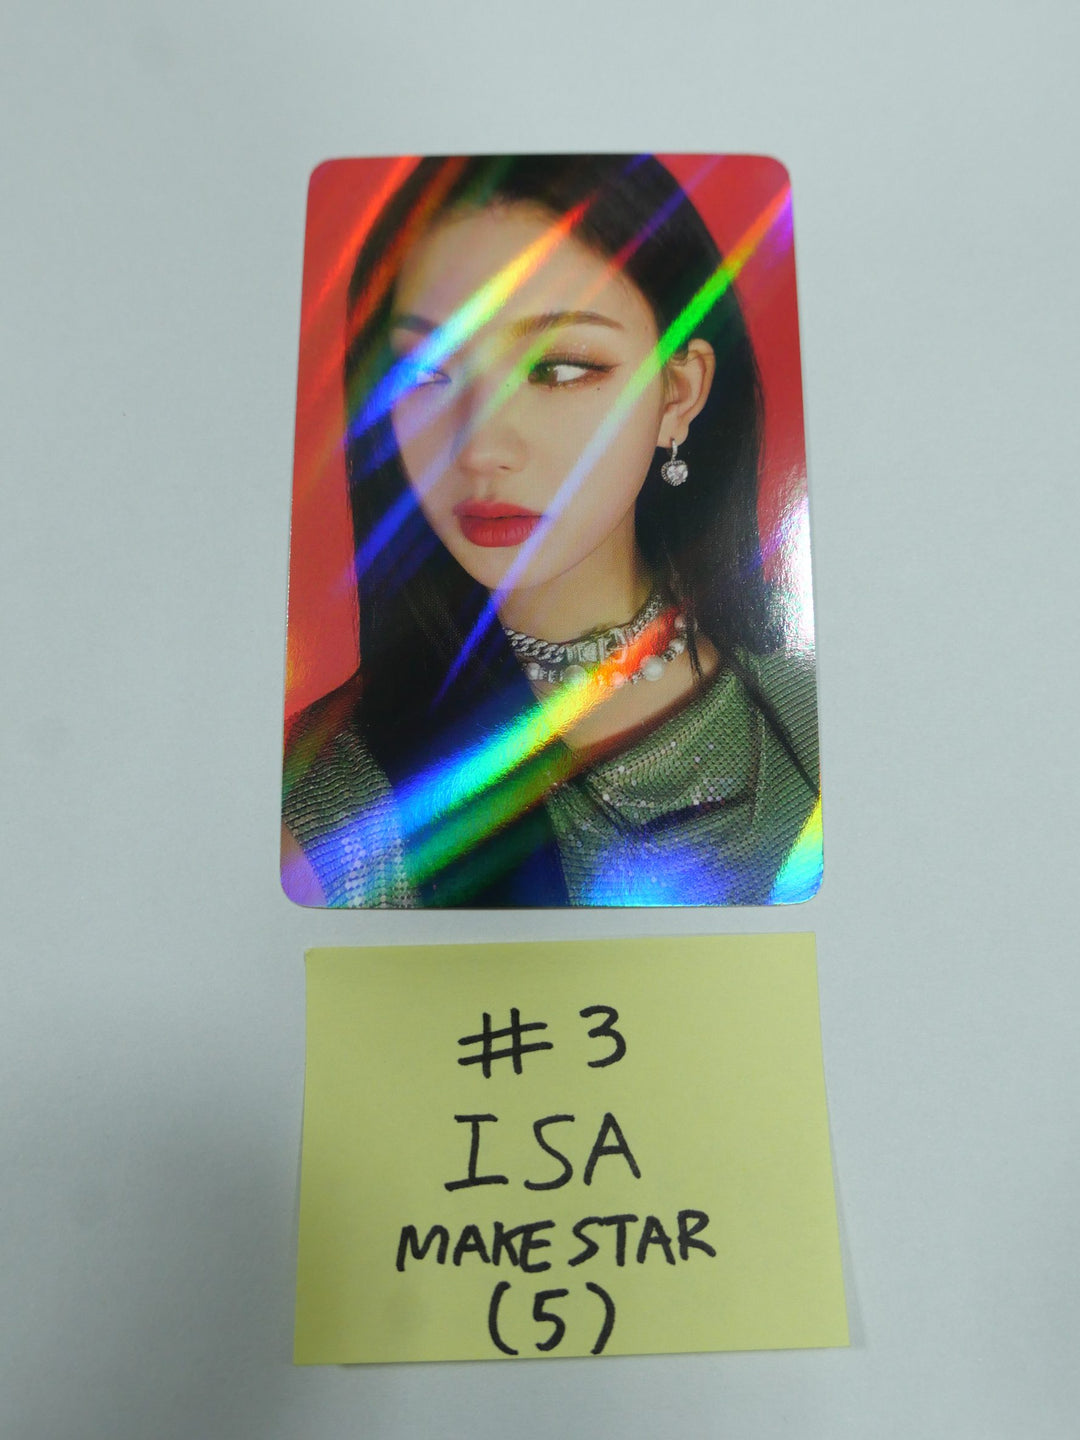 StayC 'YOUNG-LUV.COM' - Makestar Pre-Order Benefit Hologram Photocard ...